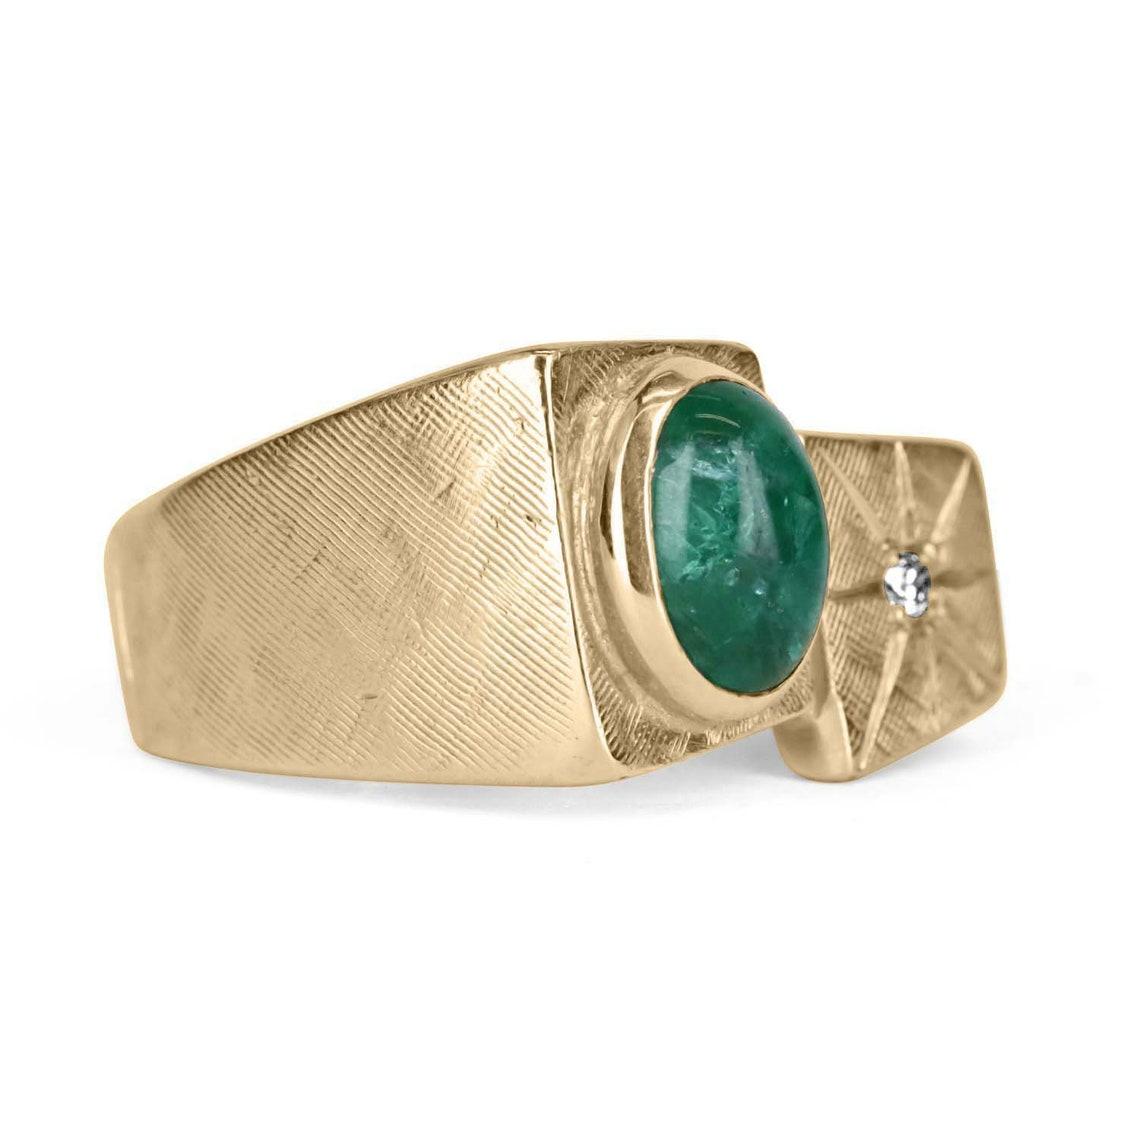 Signet rings are very prominent in politics as masculine rings, throughout history. This 14k gold signet ring will add lots of character to your daily look, emphasizing your edgier side. A natural emerald cabochon is bezel set and has excellent